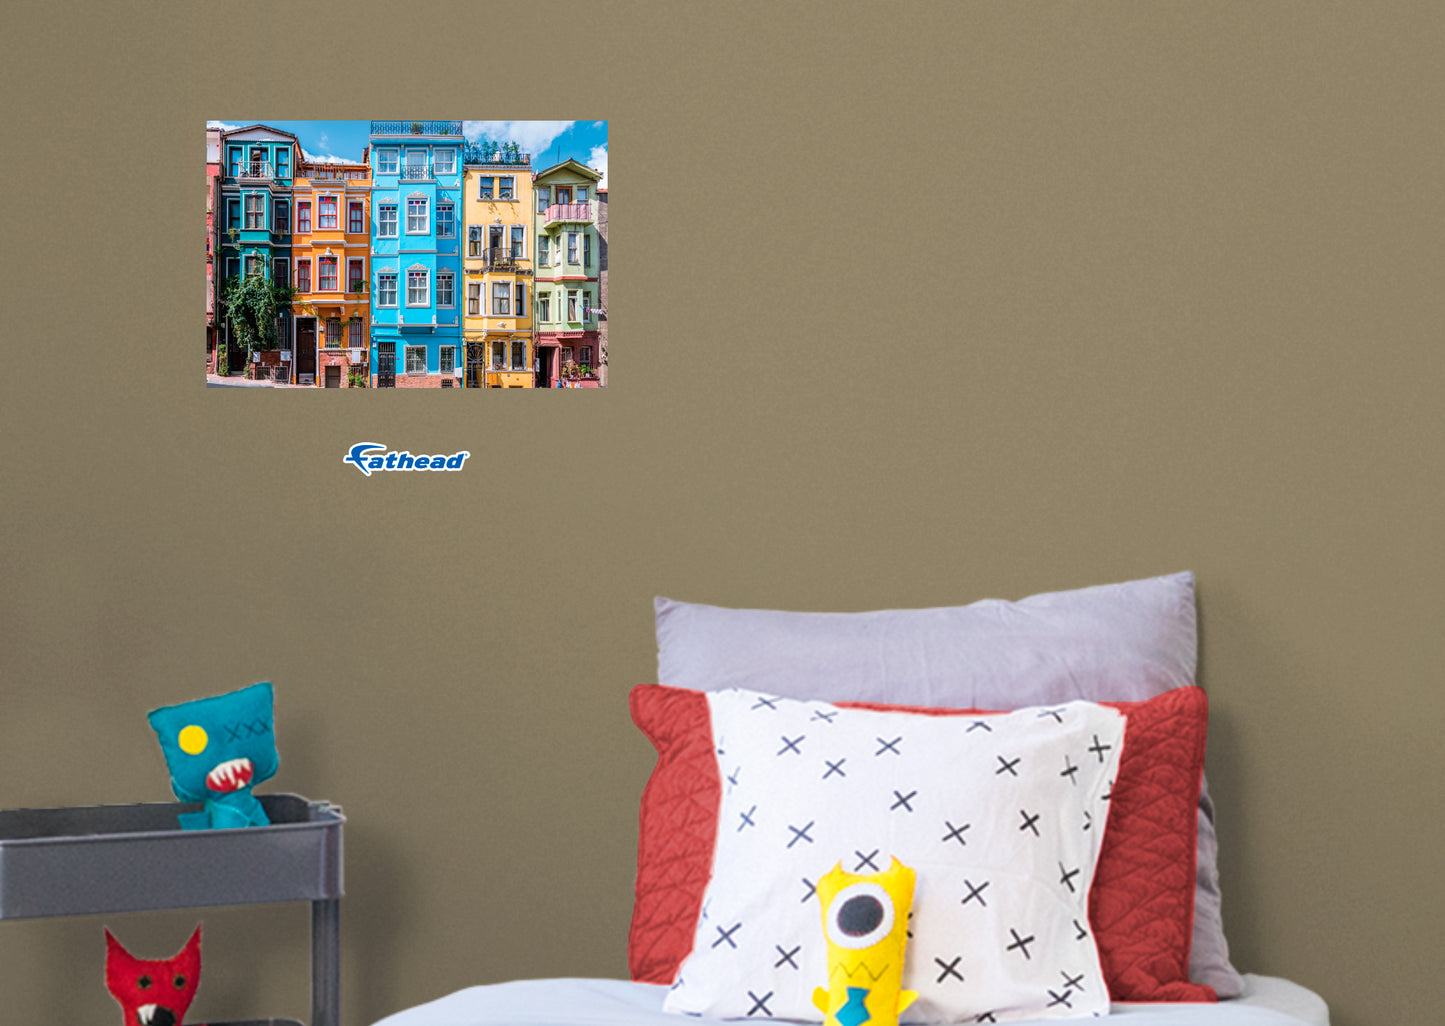 Generic Scenery: Colored Houses Poster        -   Removable     Adhesive Decal